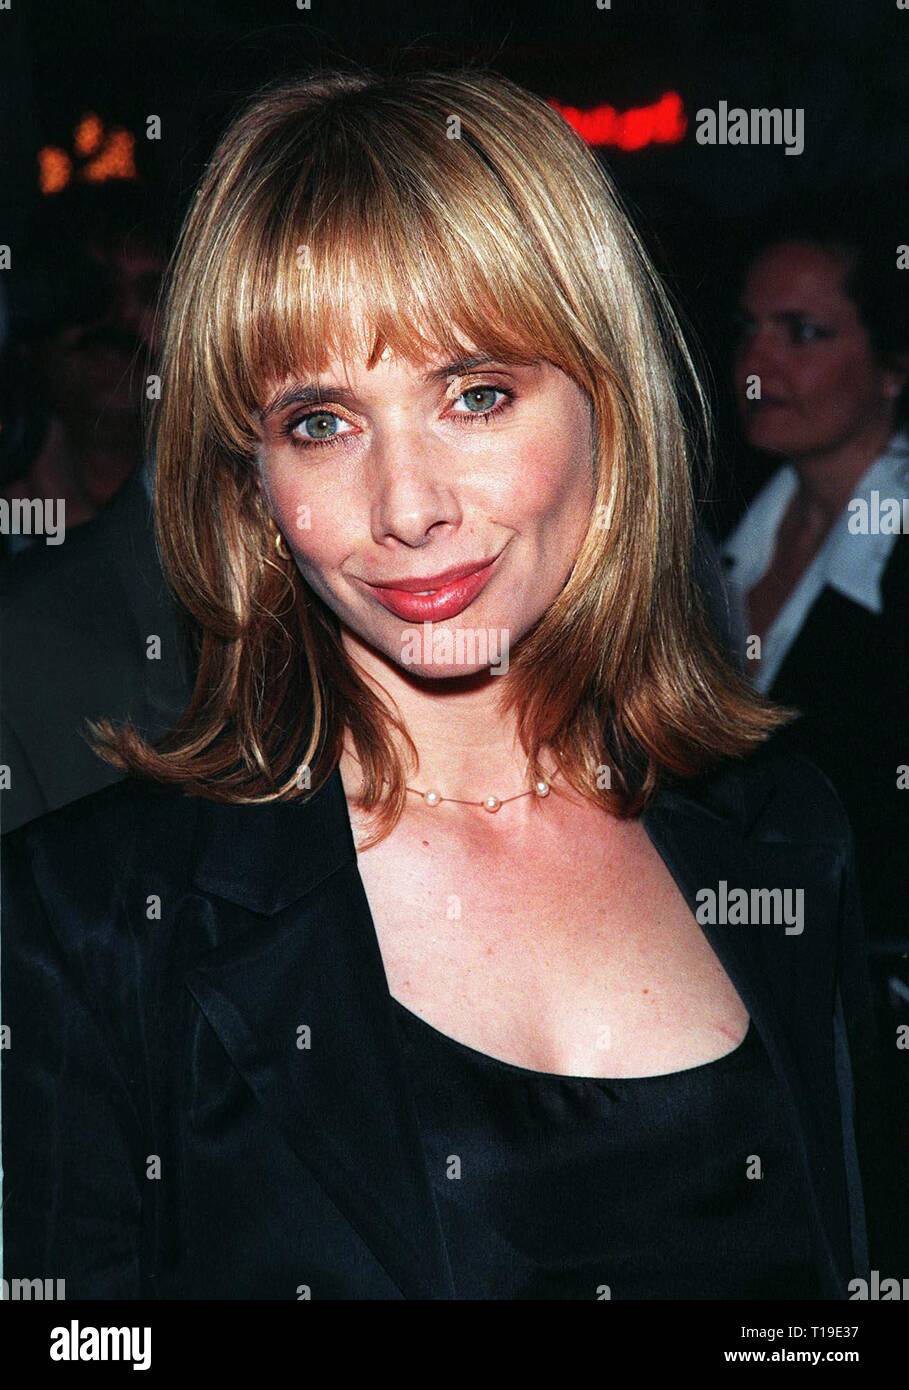 LOS ANGELES, CA - April 8, 1998: Actress ROSANNA ARQUETTE at the world premiere of 'City of Angels,' which stars Nicolas Cage & Meg Ryan. Stock Photo